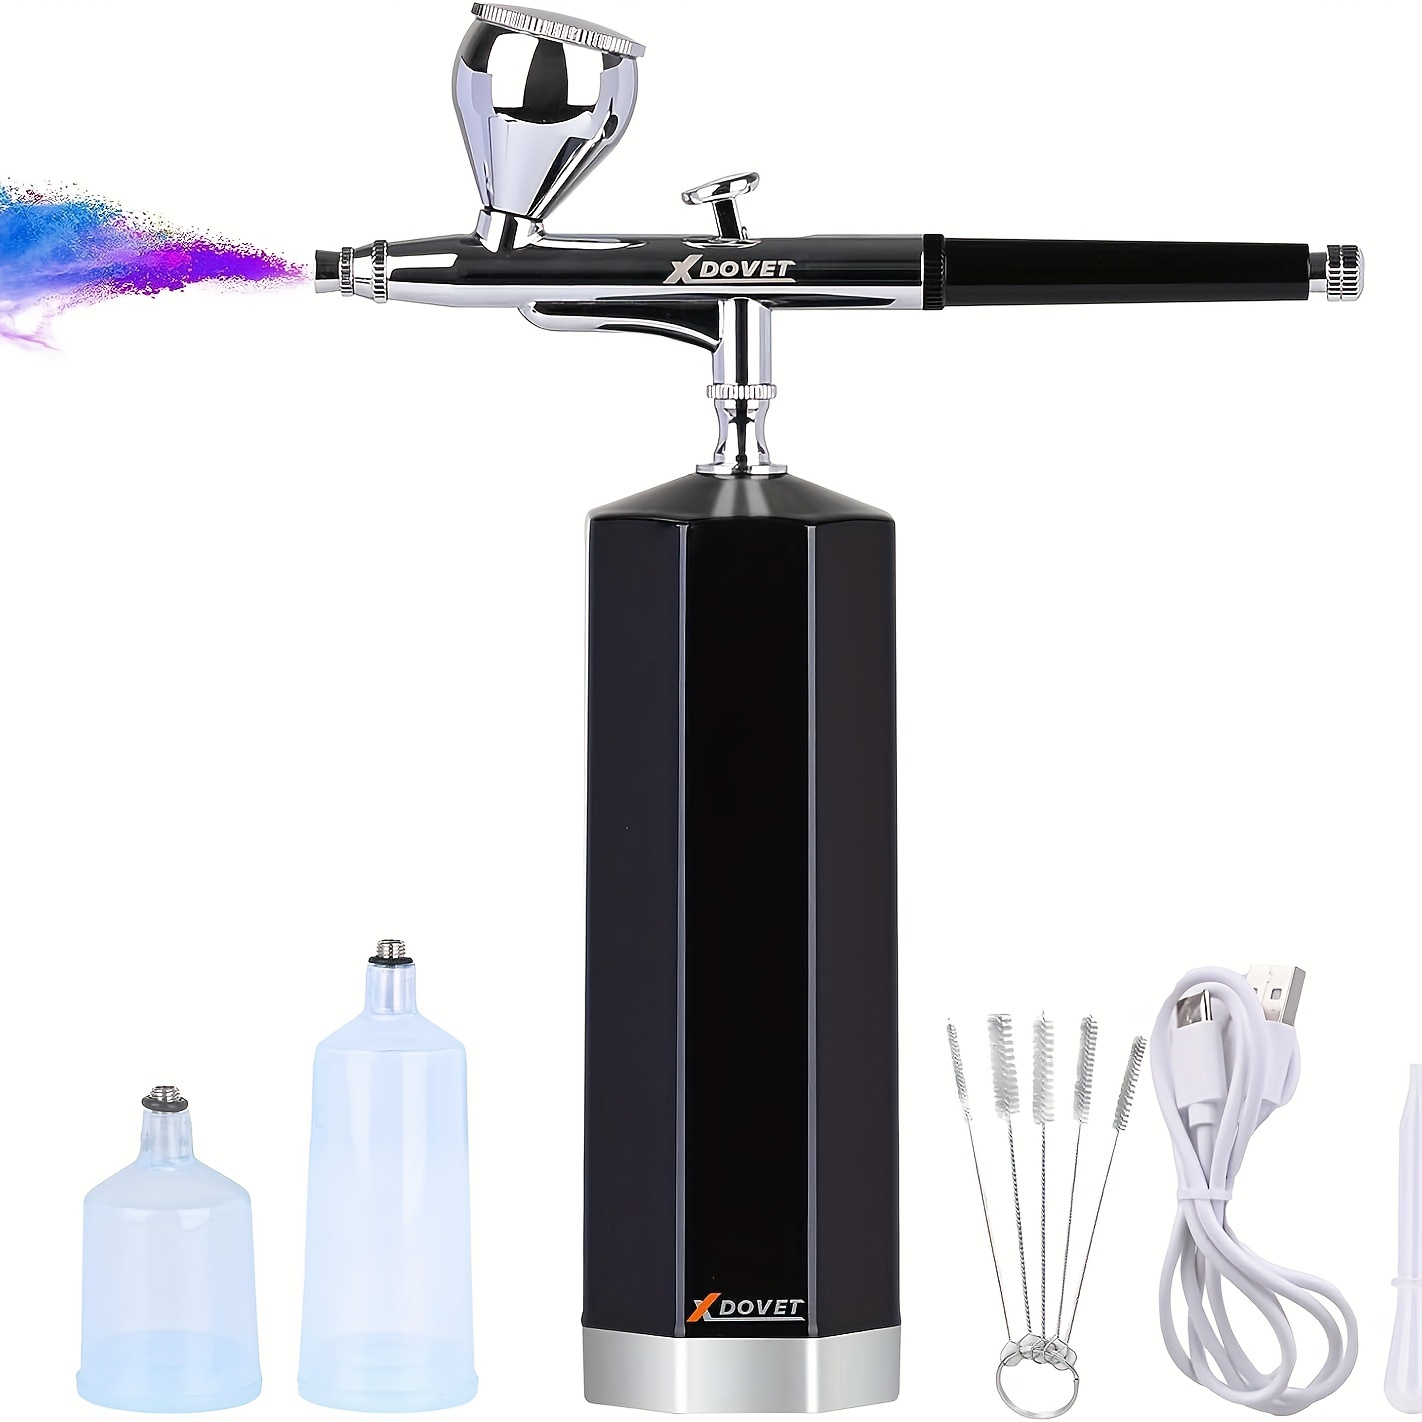 Cordless Airbrush Kit with Compressor, 32PSI Air Brush Gun Rechargeable